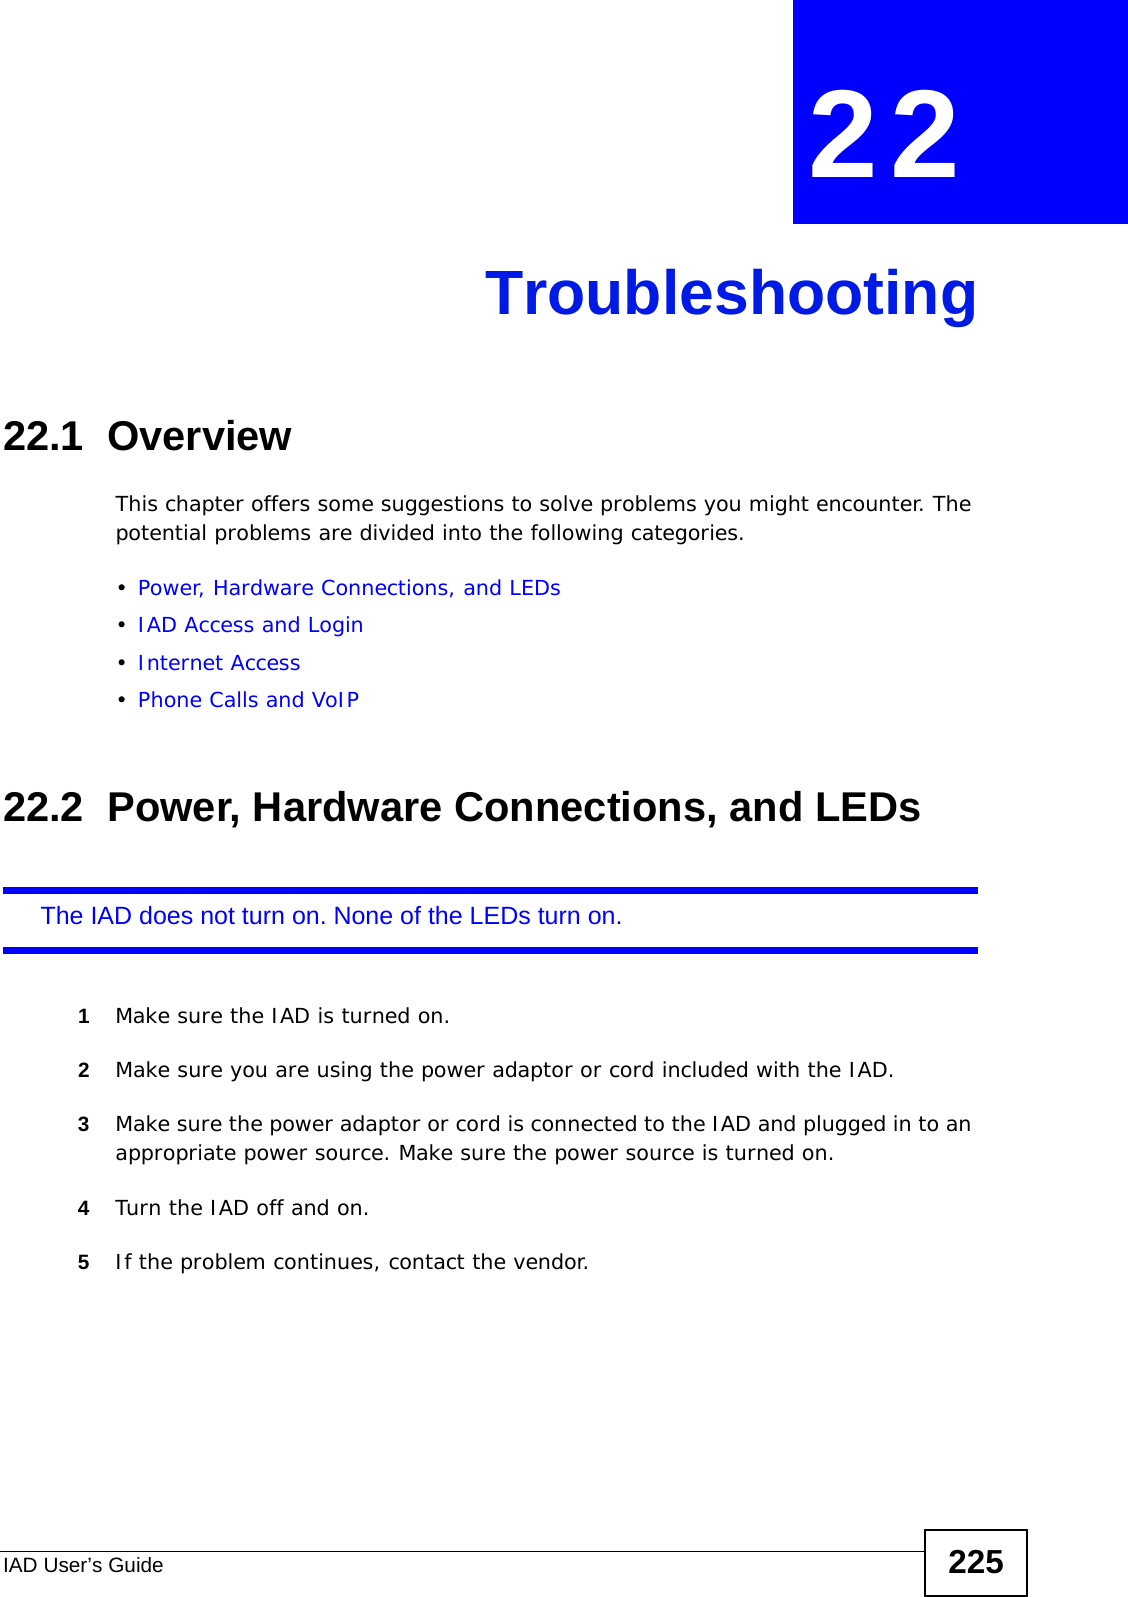 IAD User’s Guide 225CHAPTER  22 Troubleshooting22.1  OverviewThis chapter offers some suggestions to solve problems you might encounter. The potential problems are divided into the following categories. •Power, Hardware Connections, and LEDs•IAD Access and Login•Internet Access•Phone Calls and VoIP22.2  Power, Hardware Connections, and LEDsThe IAD does not turn on. None of the LEDs turn on.1Make sure the IAD is turned on. 2Make sure you are using the power adaptor or cord included with the IAD.3Make sure the power adaptor or cord is connected to the IAD and plugged in to an appropriate power source. Make sure the power source is turned on.4Turn the IAD off and on. 5If the problem continues, contact the vendor.